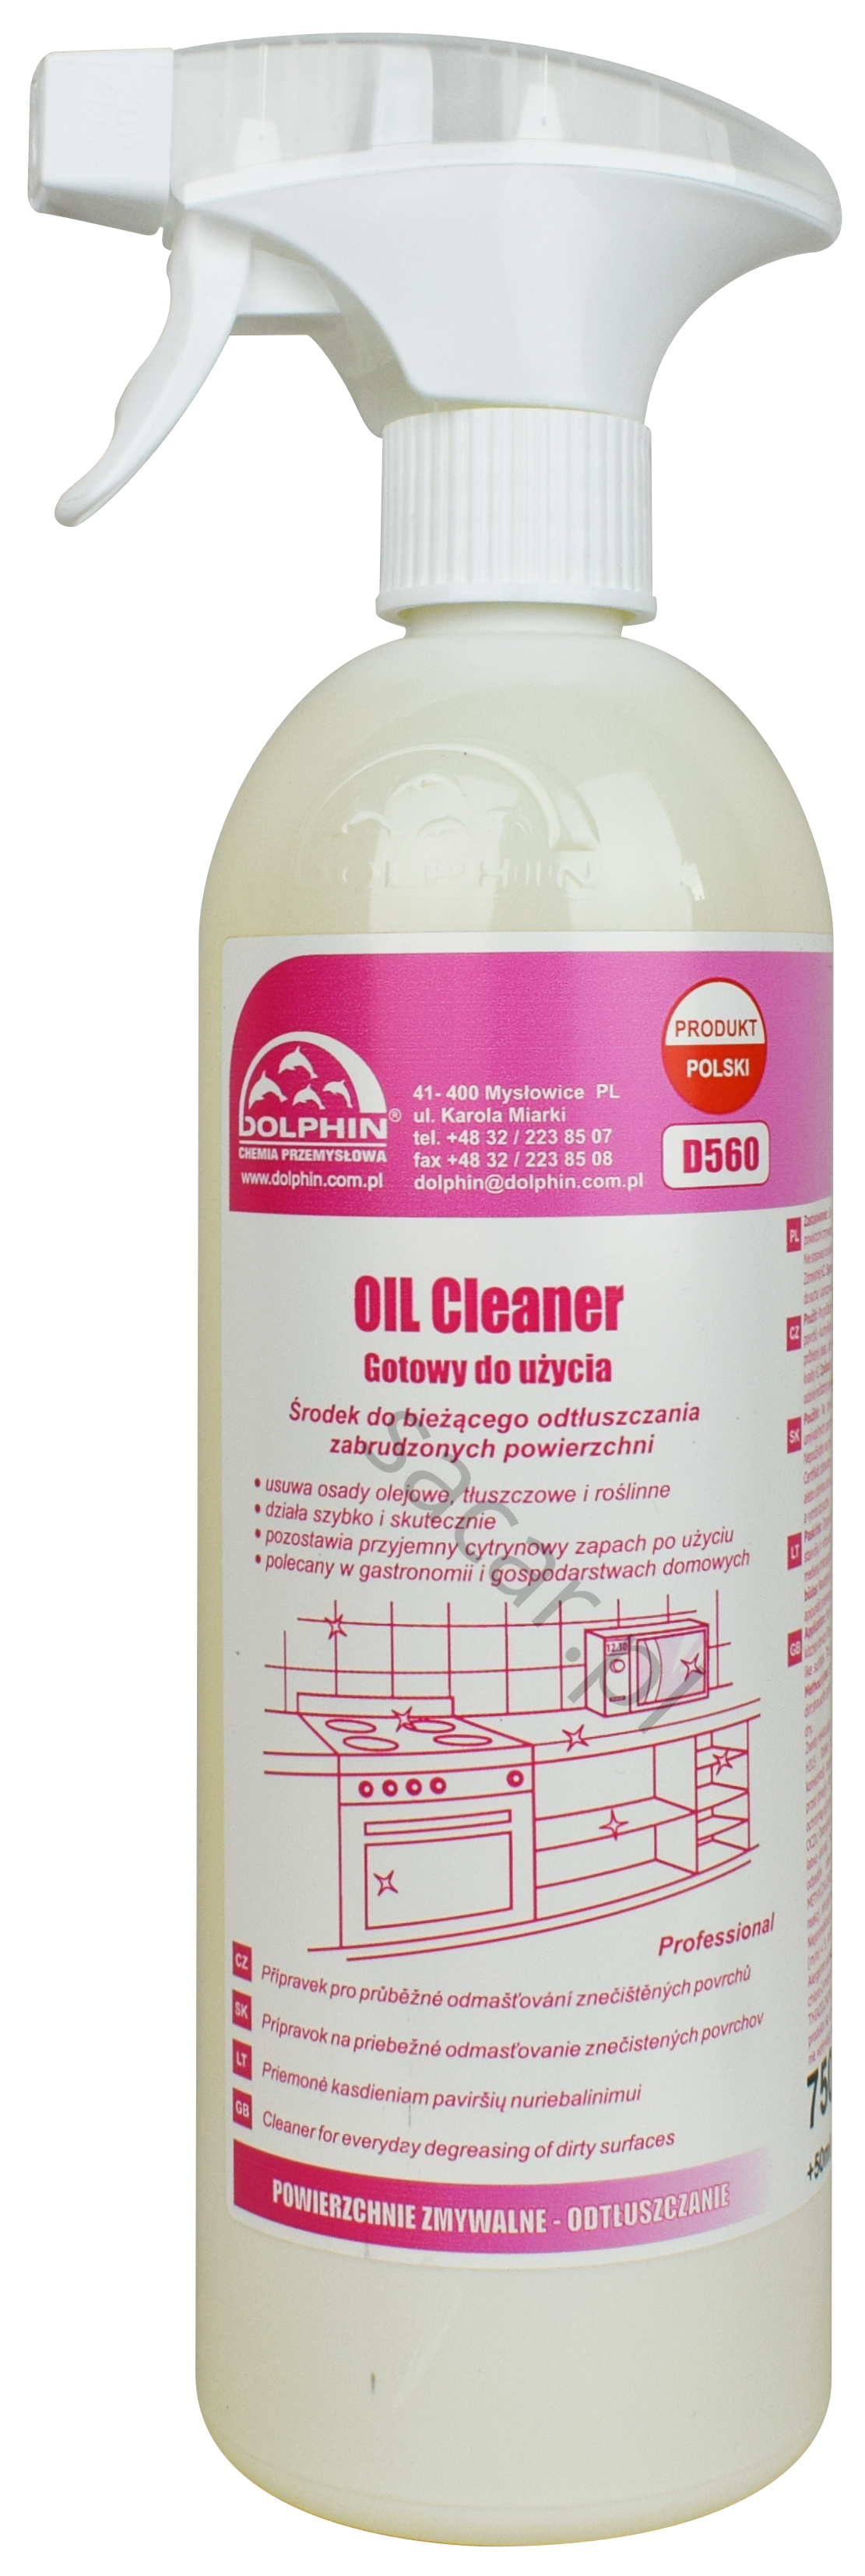 Dolphin Oil Cleaner 1l